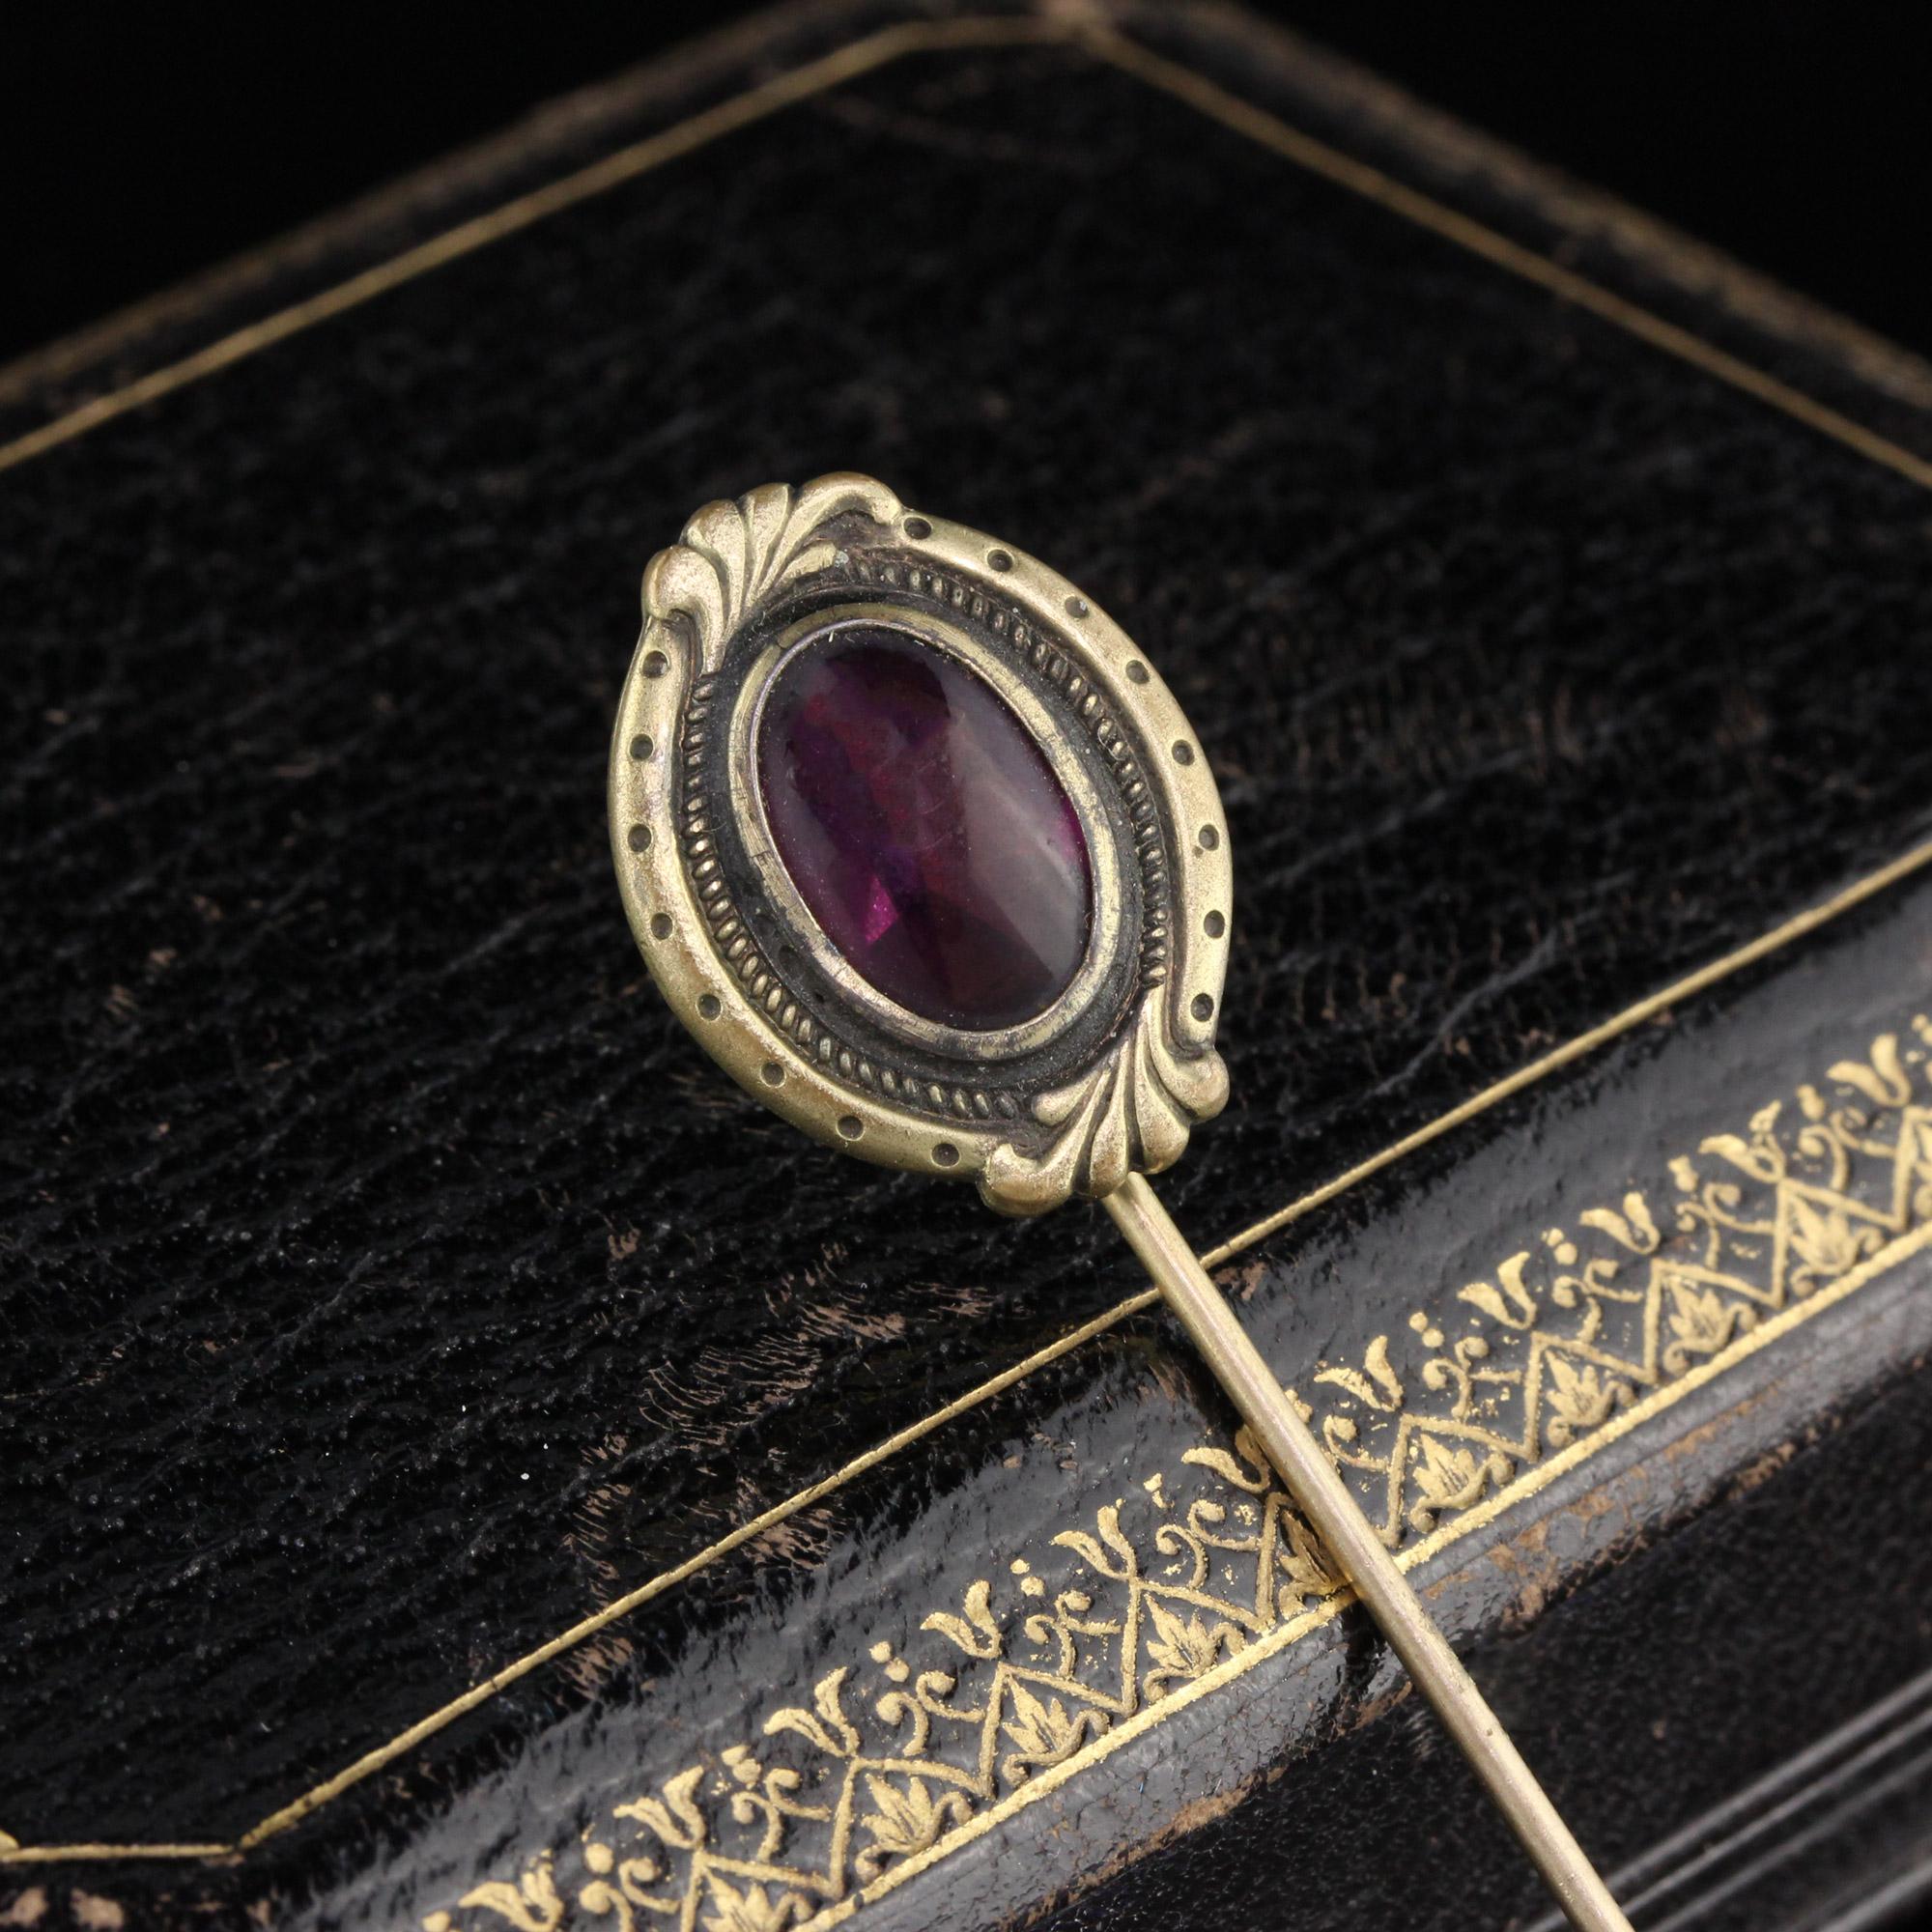 Vintage stick pin made from base metal with a purple center stone.

Metal: Base Metal 

Measurements: 21.13 x 15.63 mm